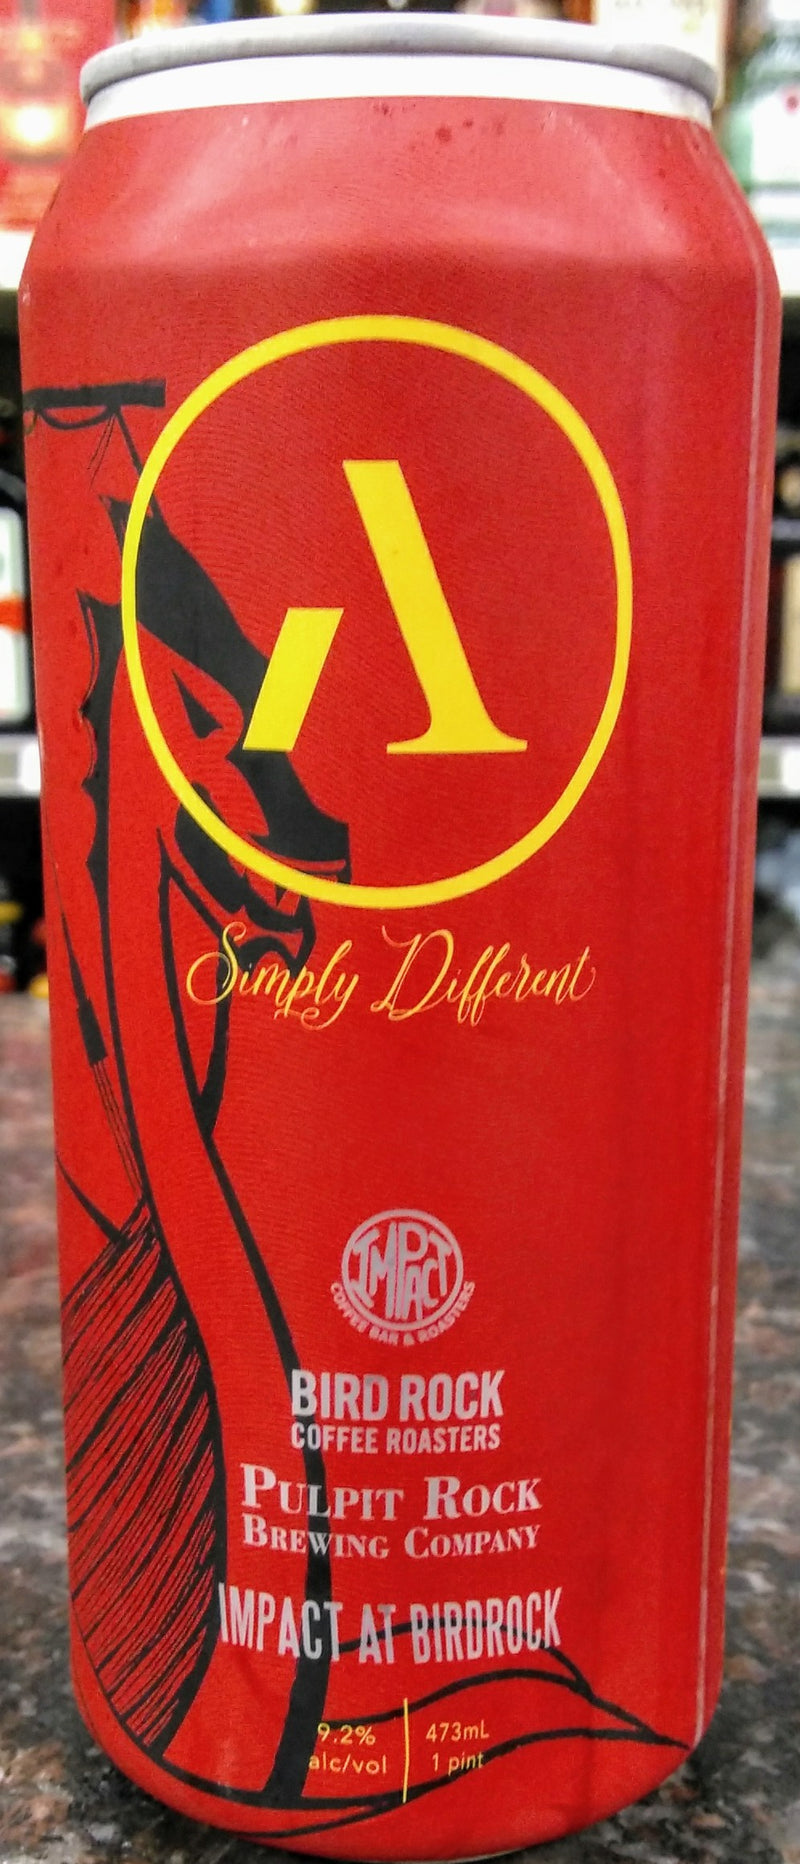 ABNORMAL BEER CO. IMPACT AT BIRDROCK IMPERIAL COFFEE STOUT 16oz can